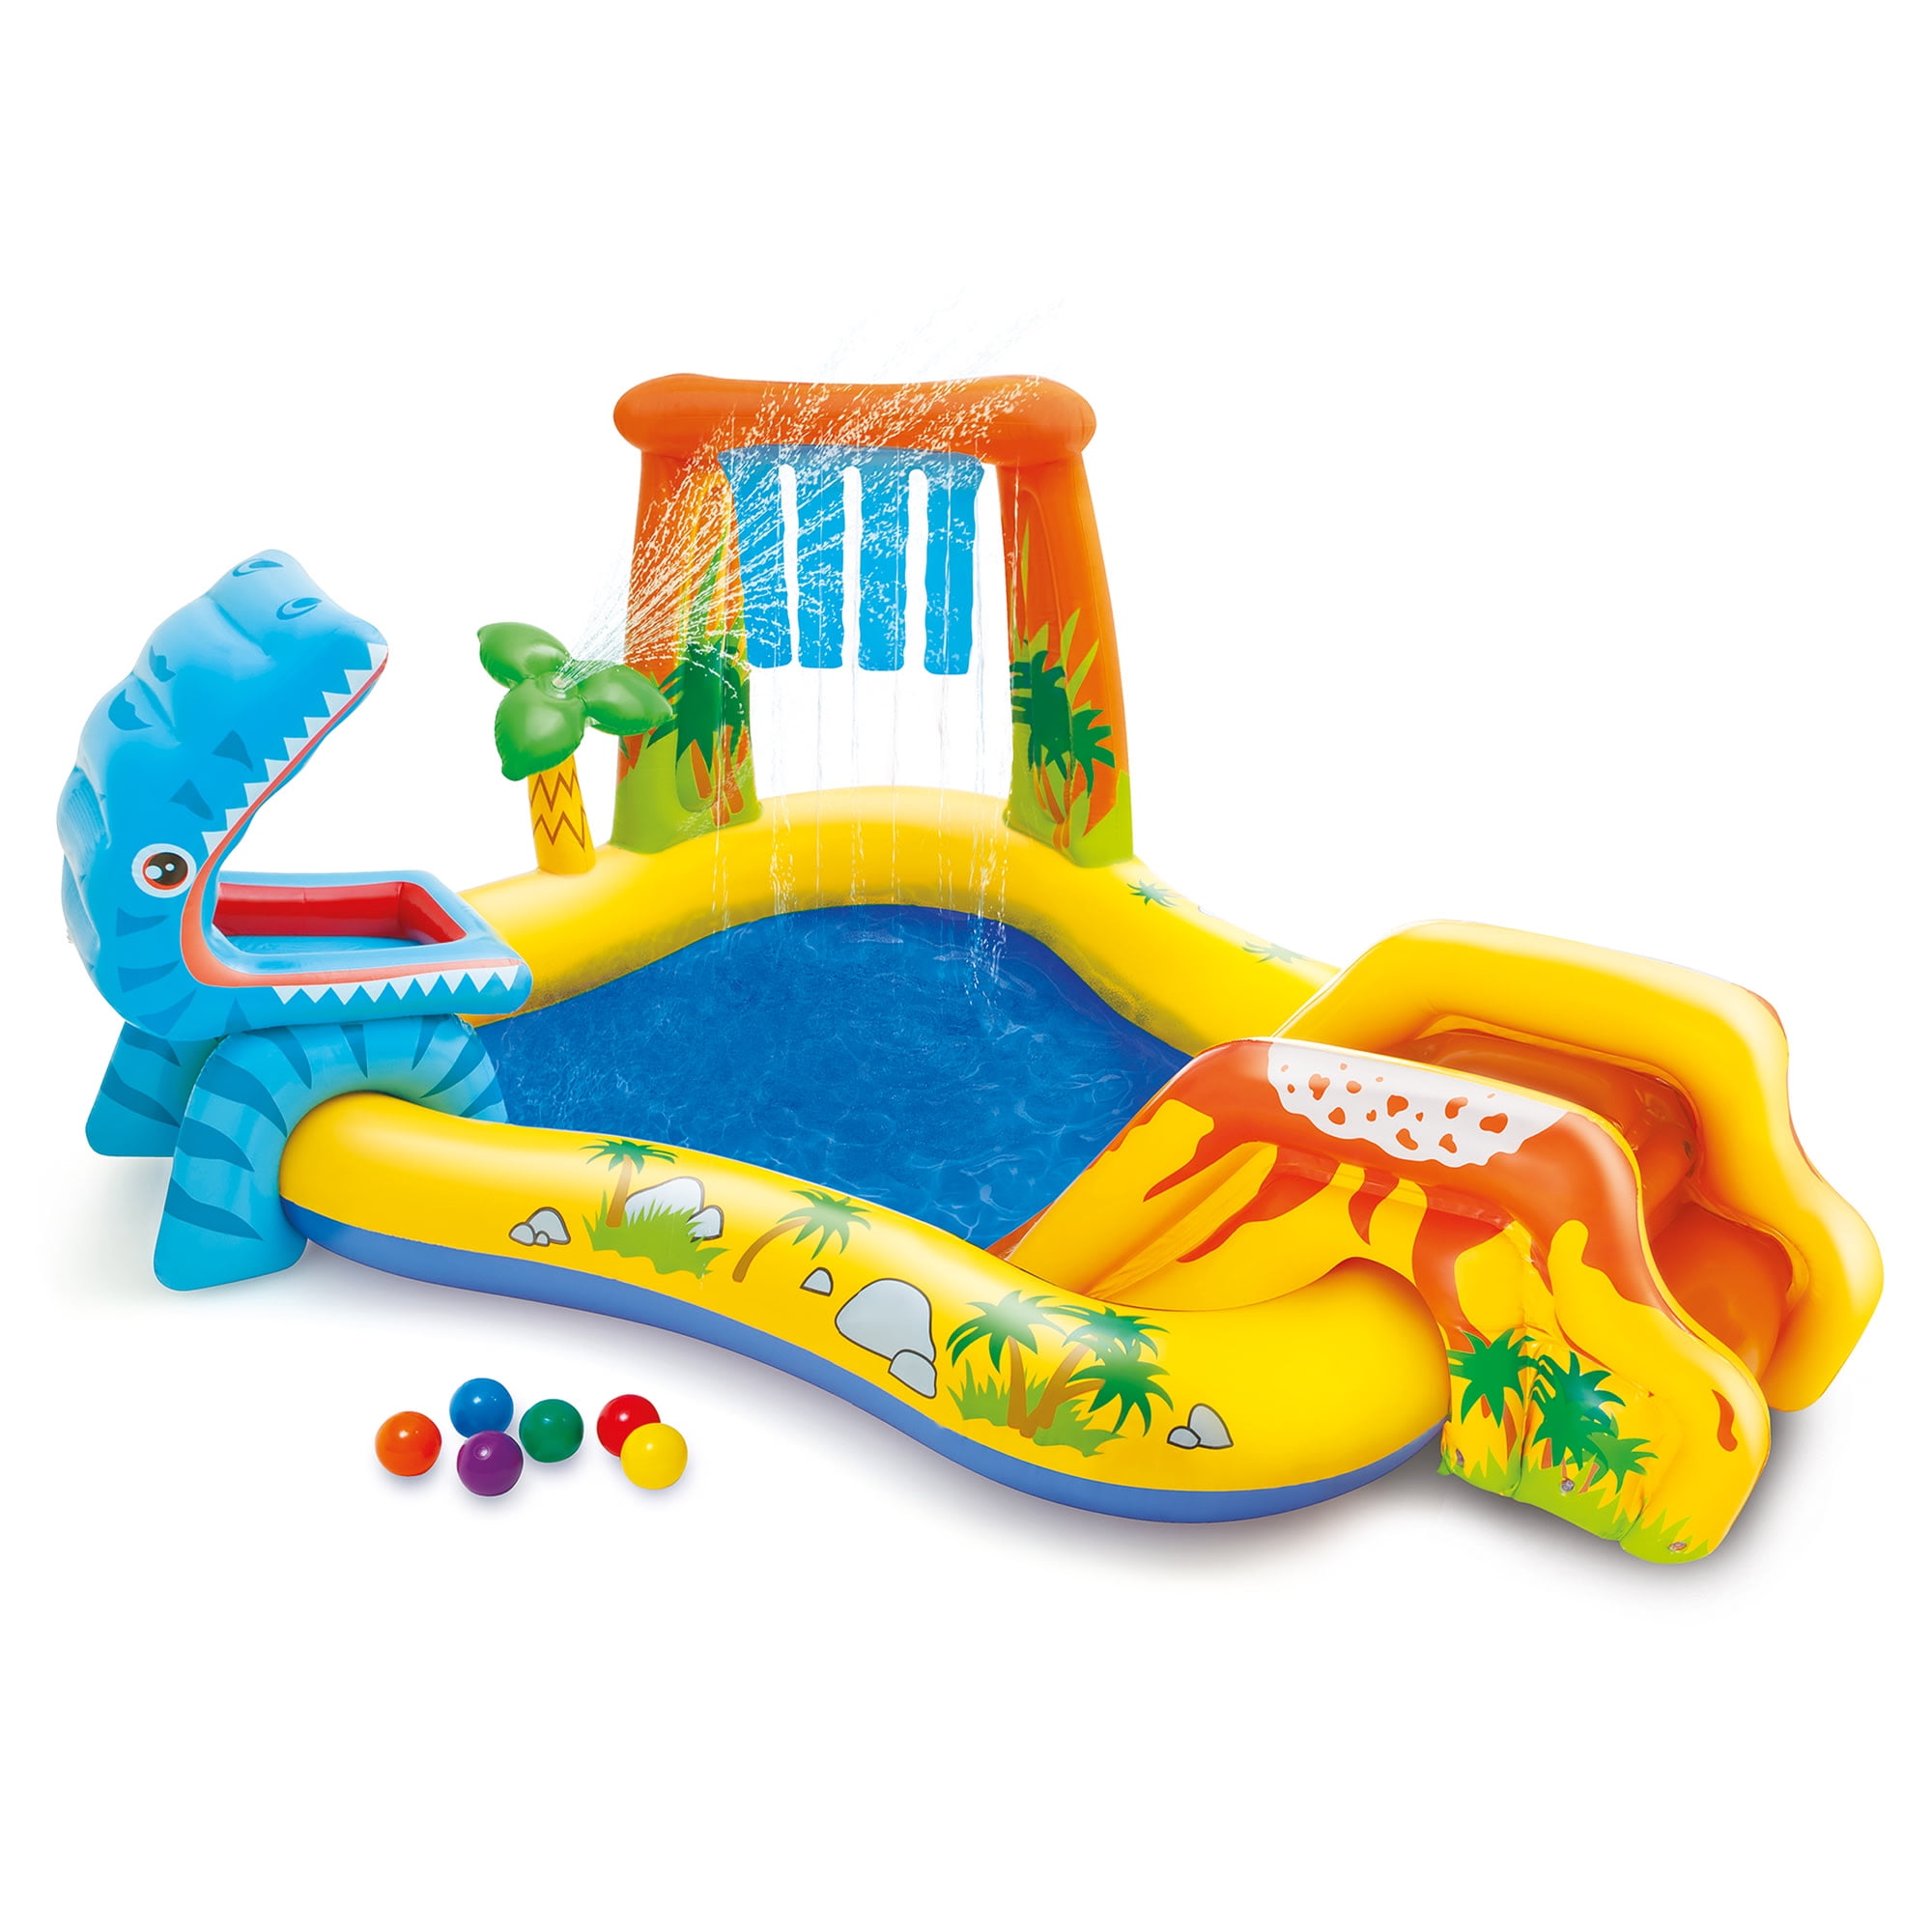 Intex: Dinosaur Inflatable Play Center - Kids Waterslide Playground,  Built-In Water Spraying Palm Tree u0026 Waterfall, 8ft 2in x 6ft 3in x 3ft 7in,  Includes 6 Colorful Plastic Balls, Ages 2+ - Walmart.com